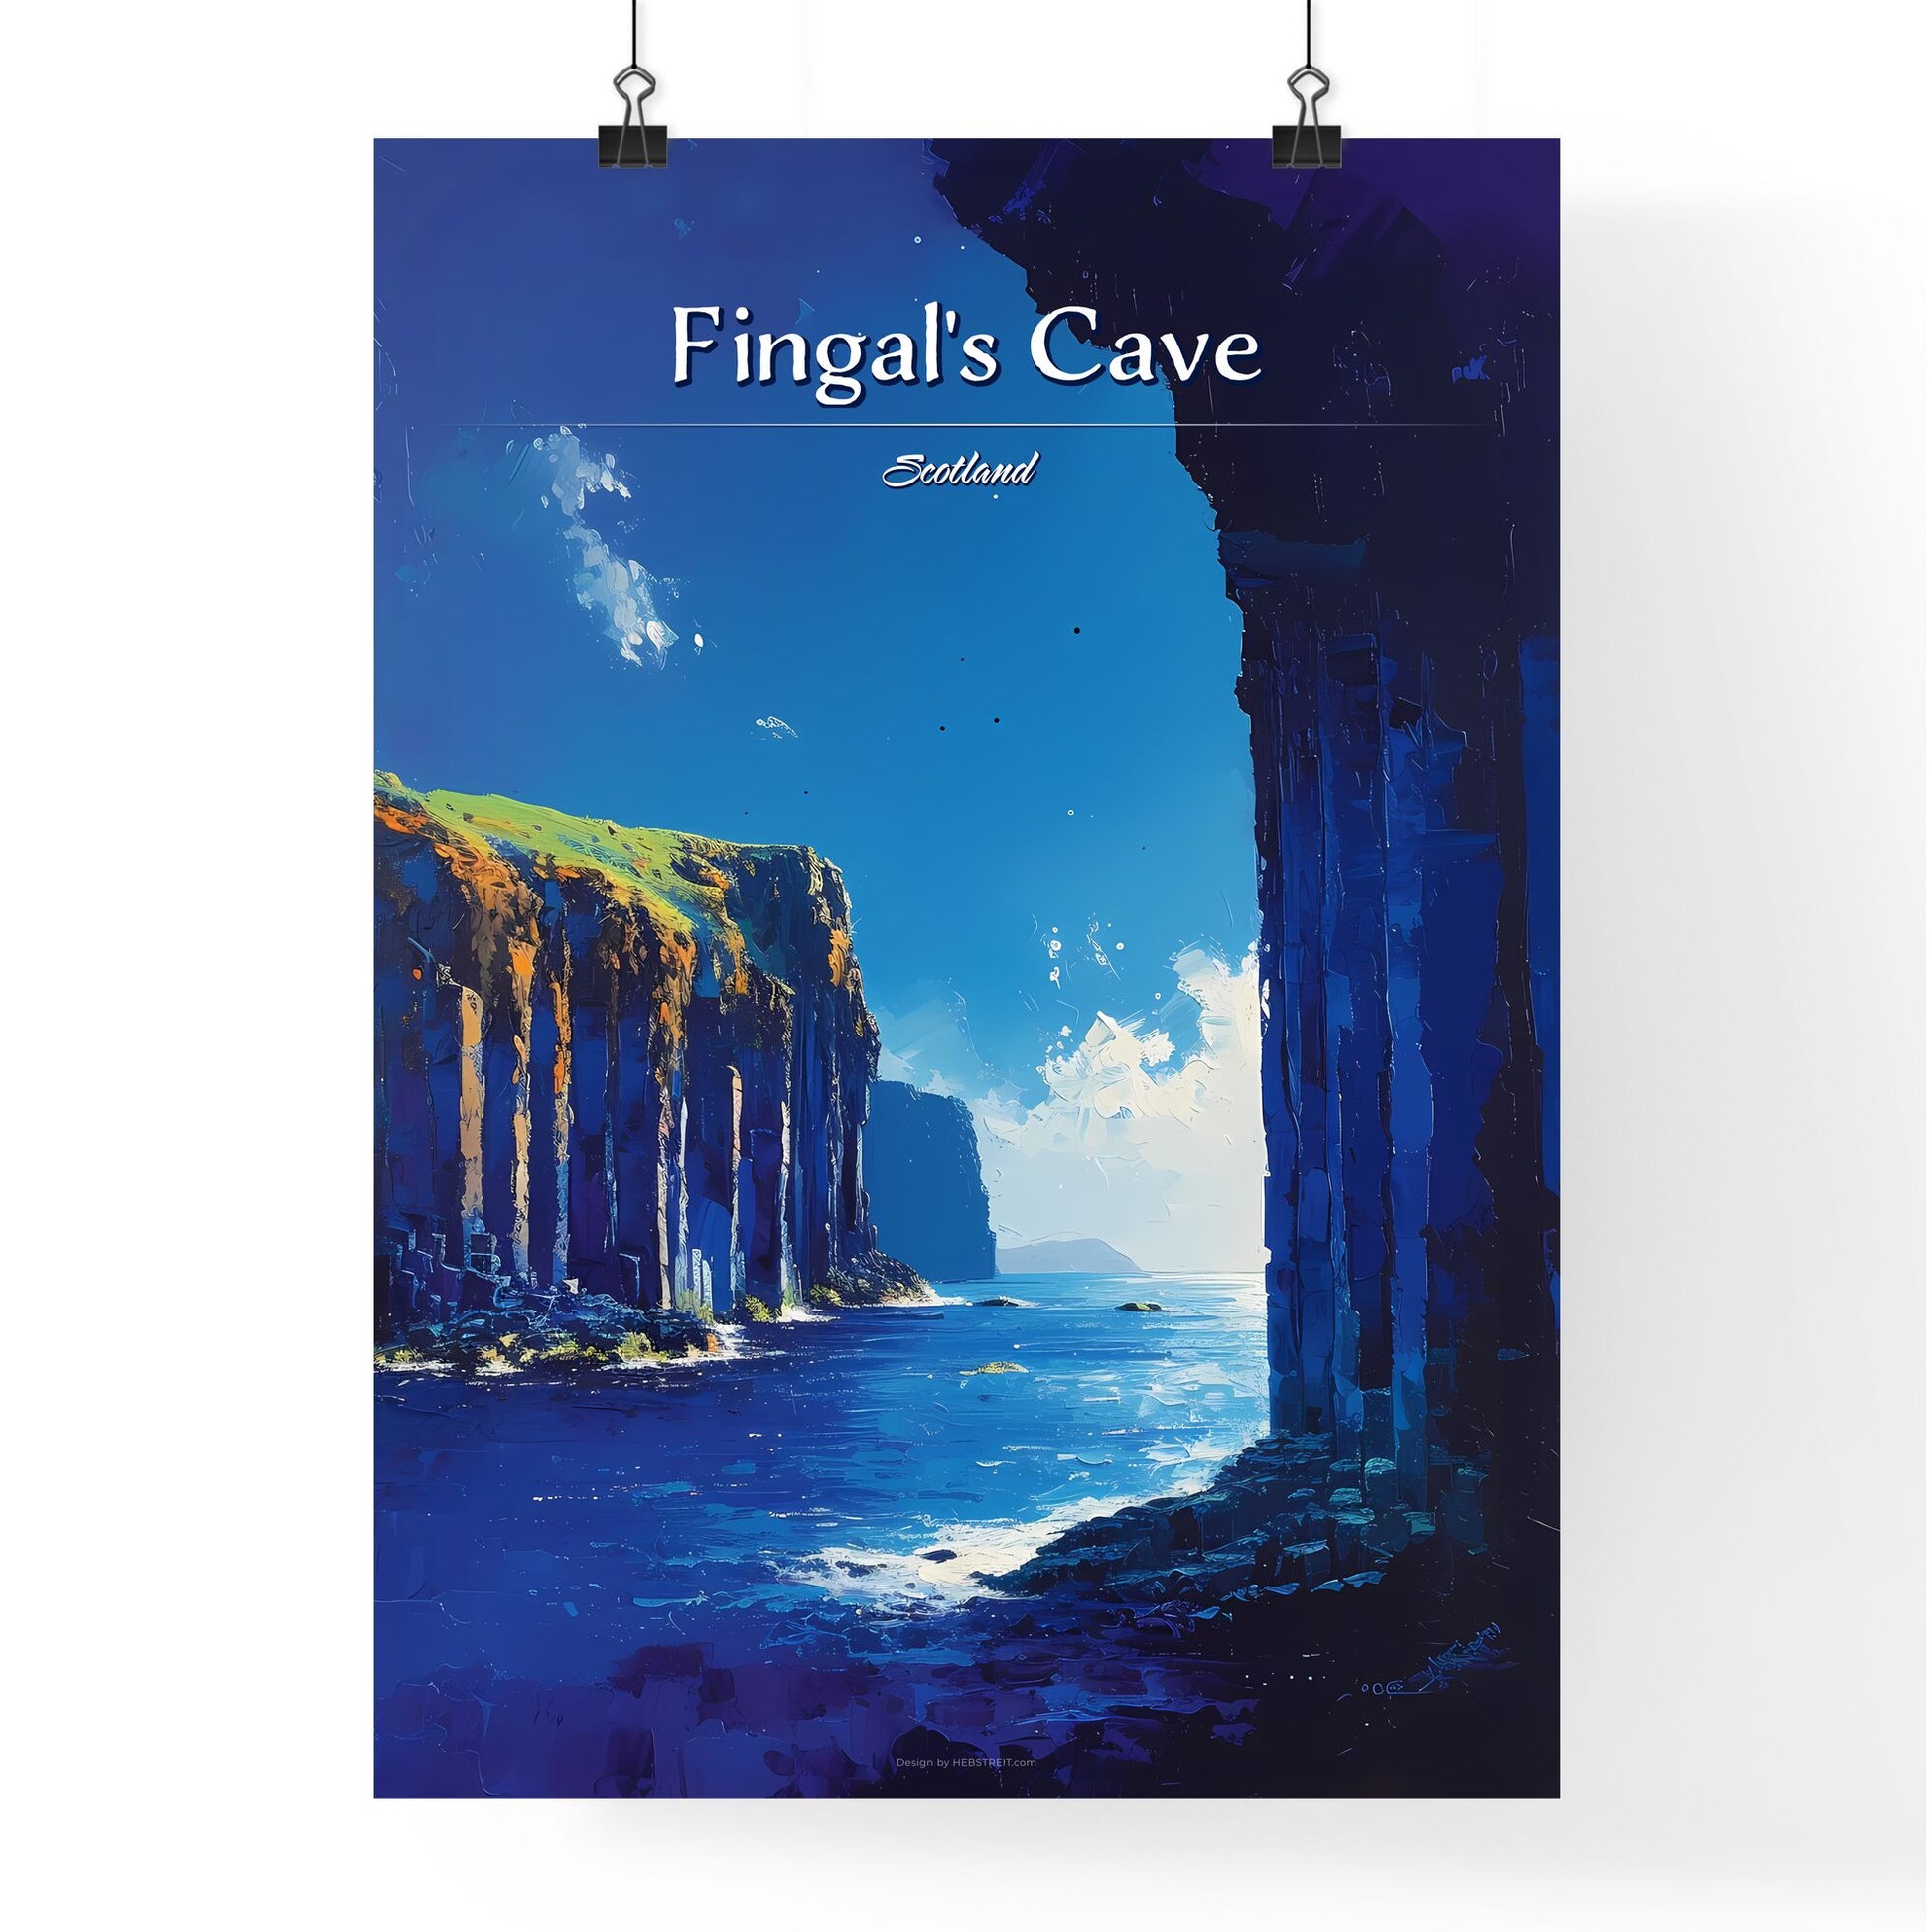 Fingal_s Cave, Scotland - Art print of a cliff side with water and grass Default Title